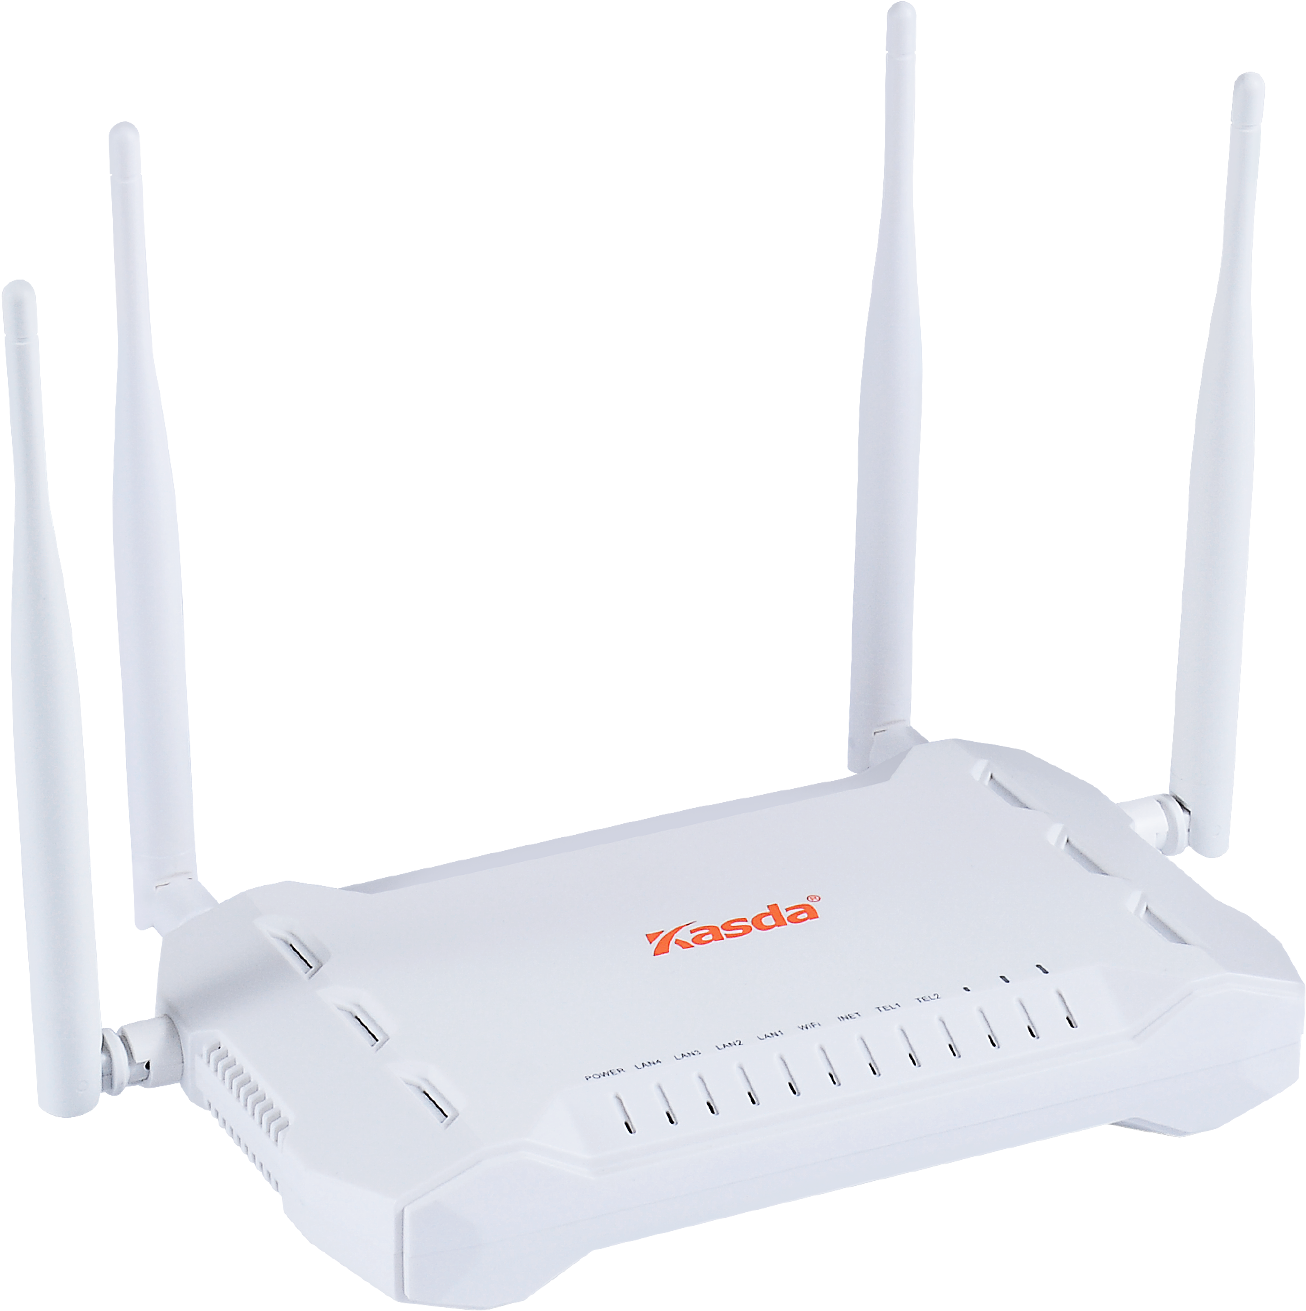 Kasda Wireless Router White Background PNG